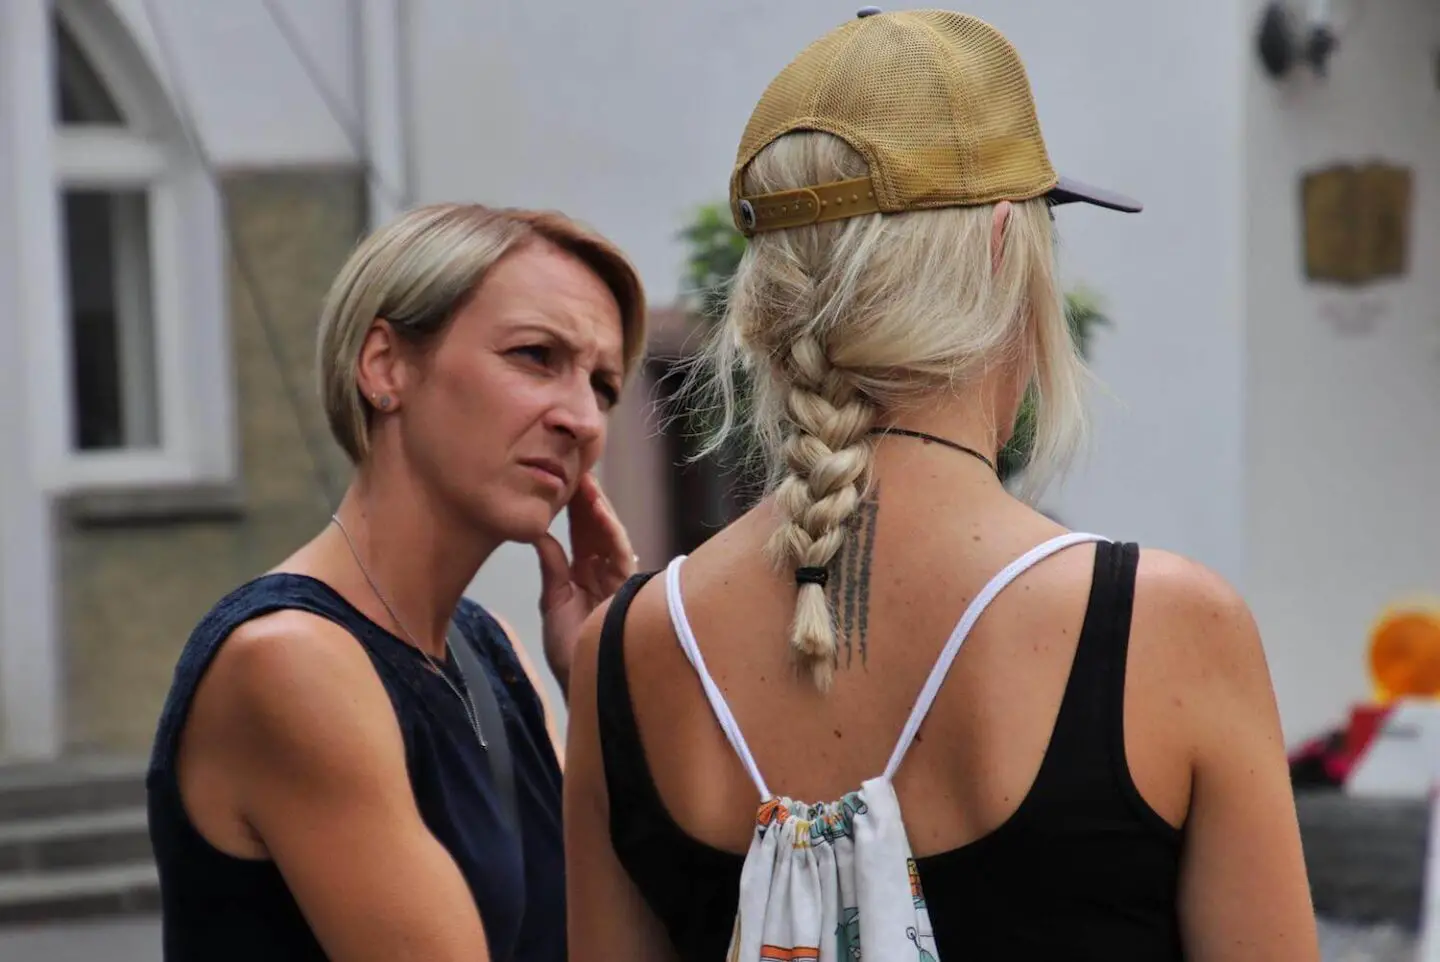 2 blonde women talking. The face of one is showing concern